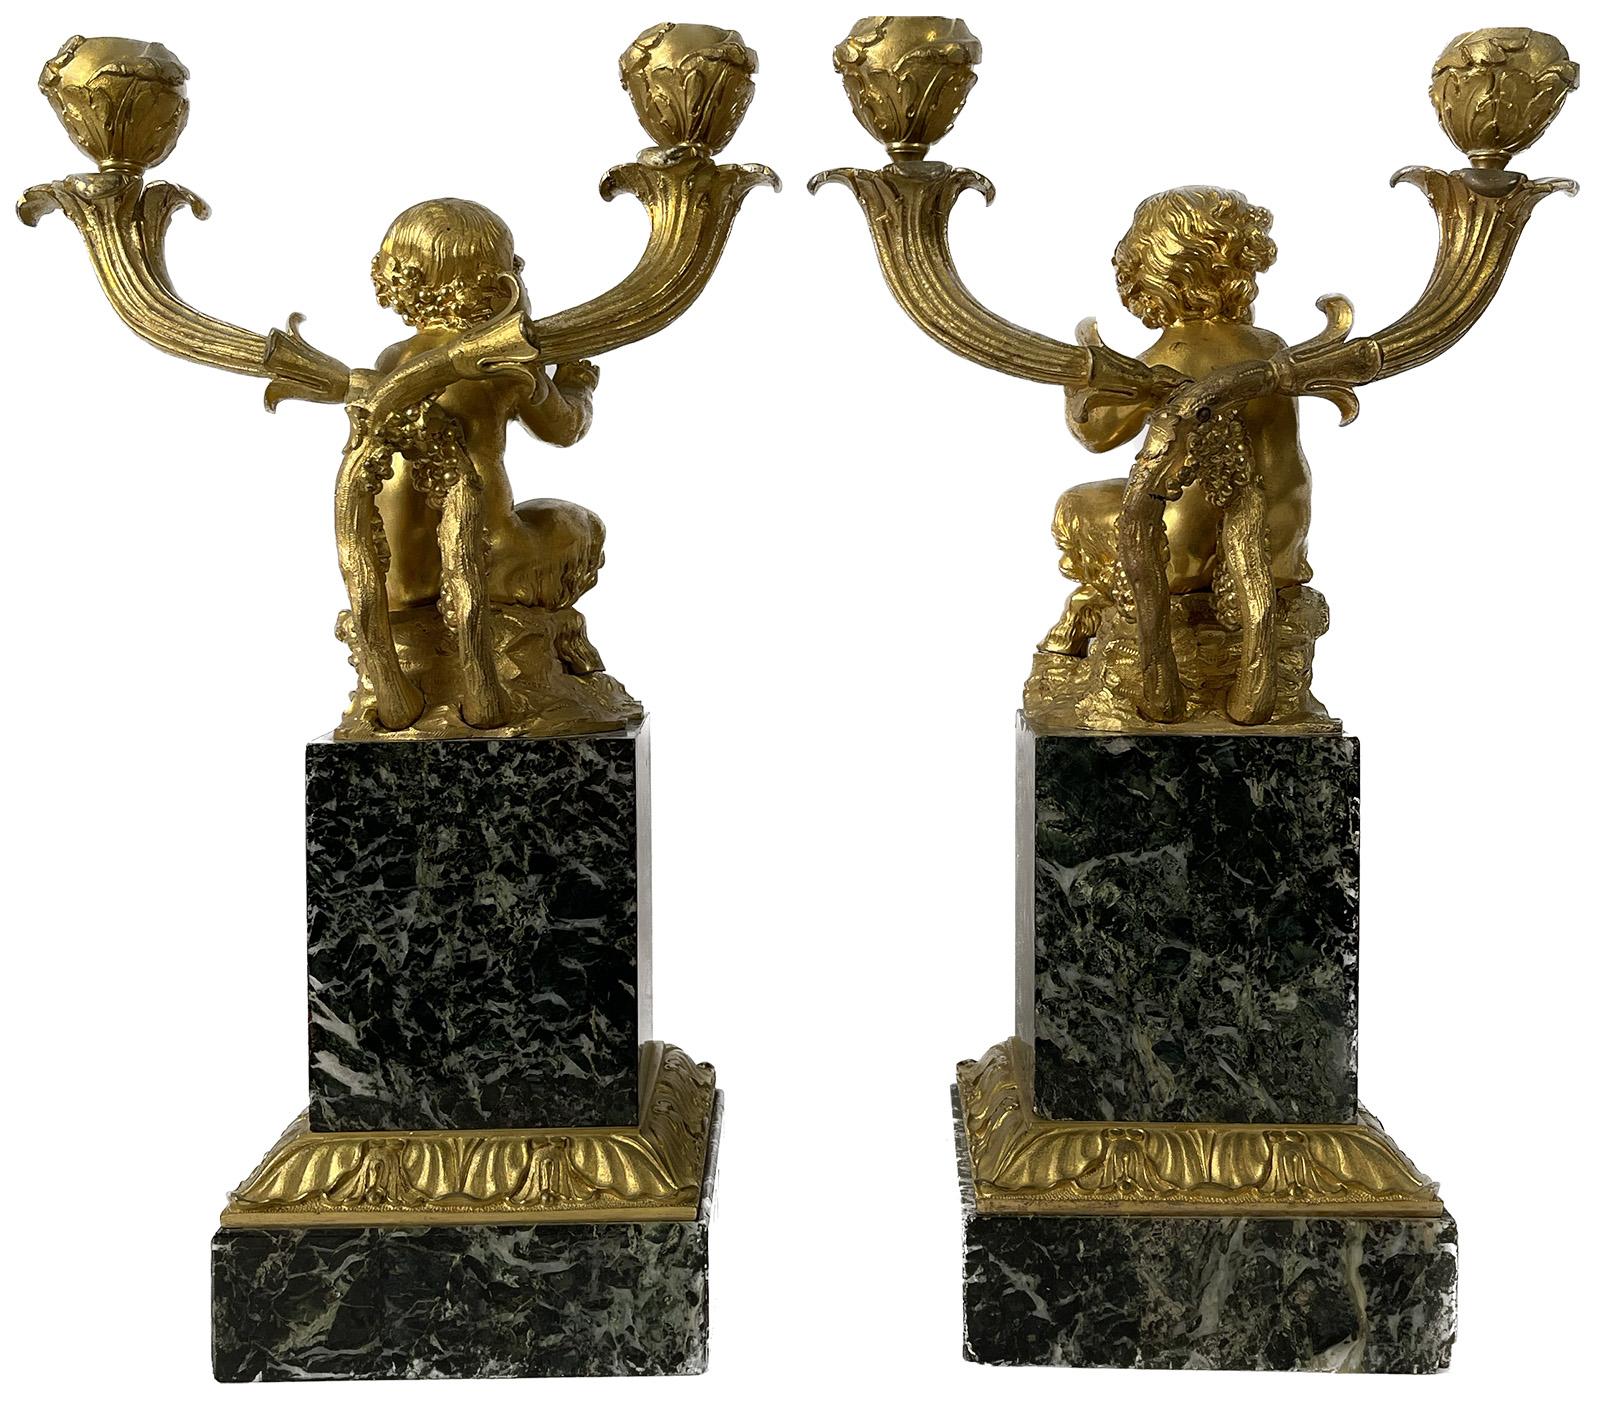 Pair of Early 19th Century Marble & Gilt Bronze Figural Candelabras In Good Condition For Sale In Salt Lake City, UT